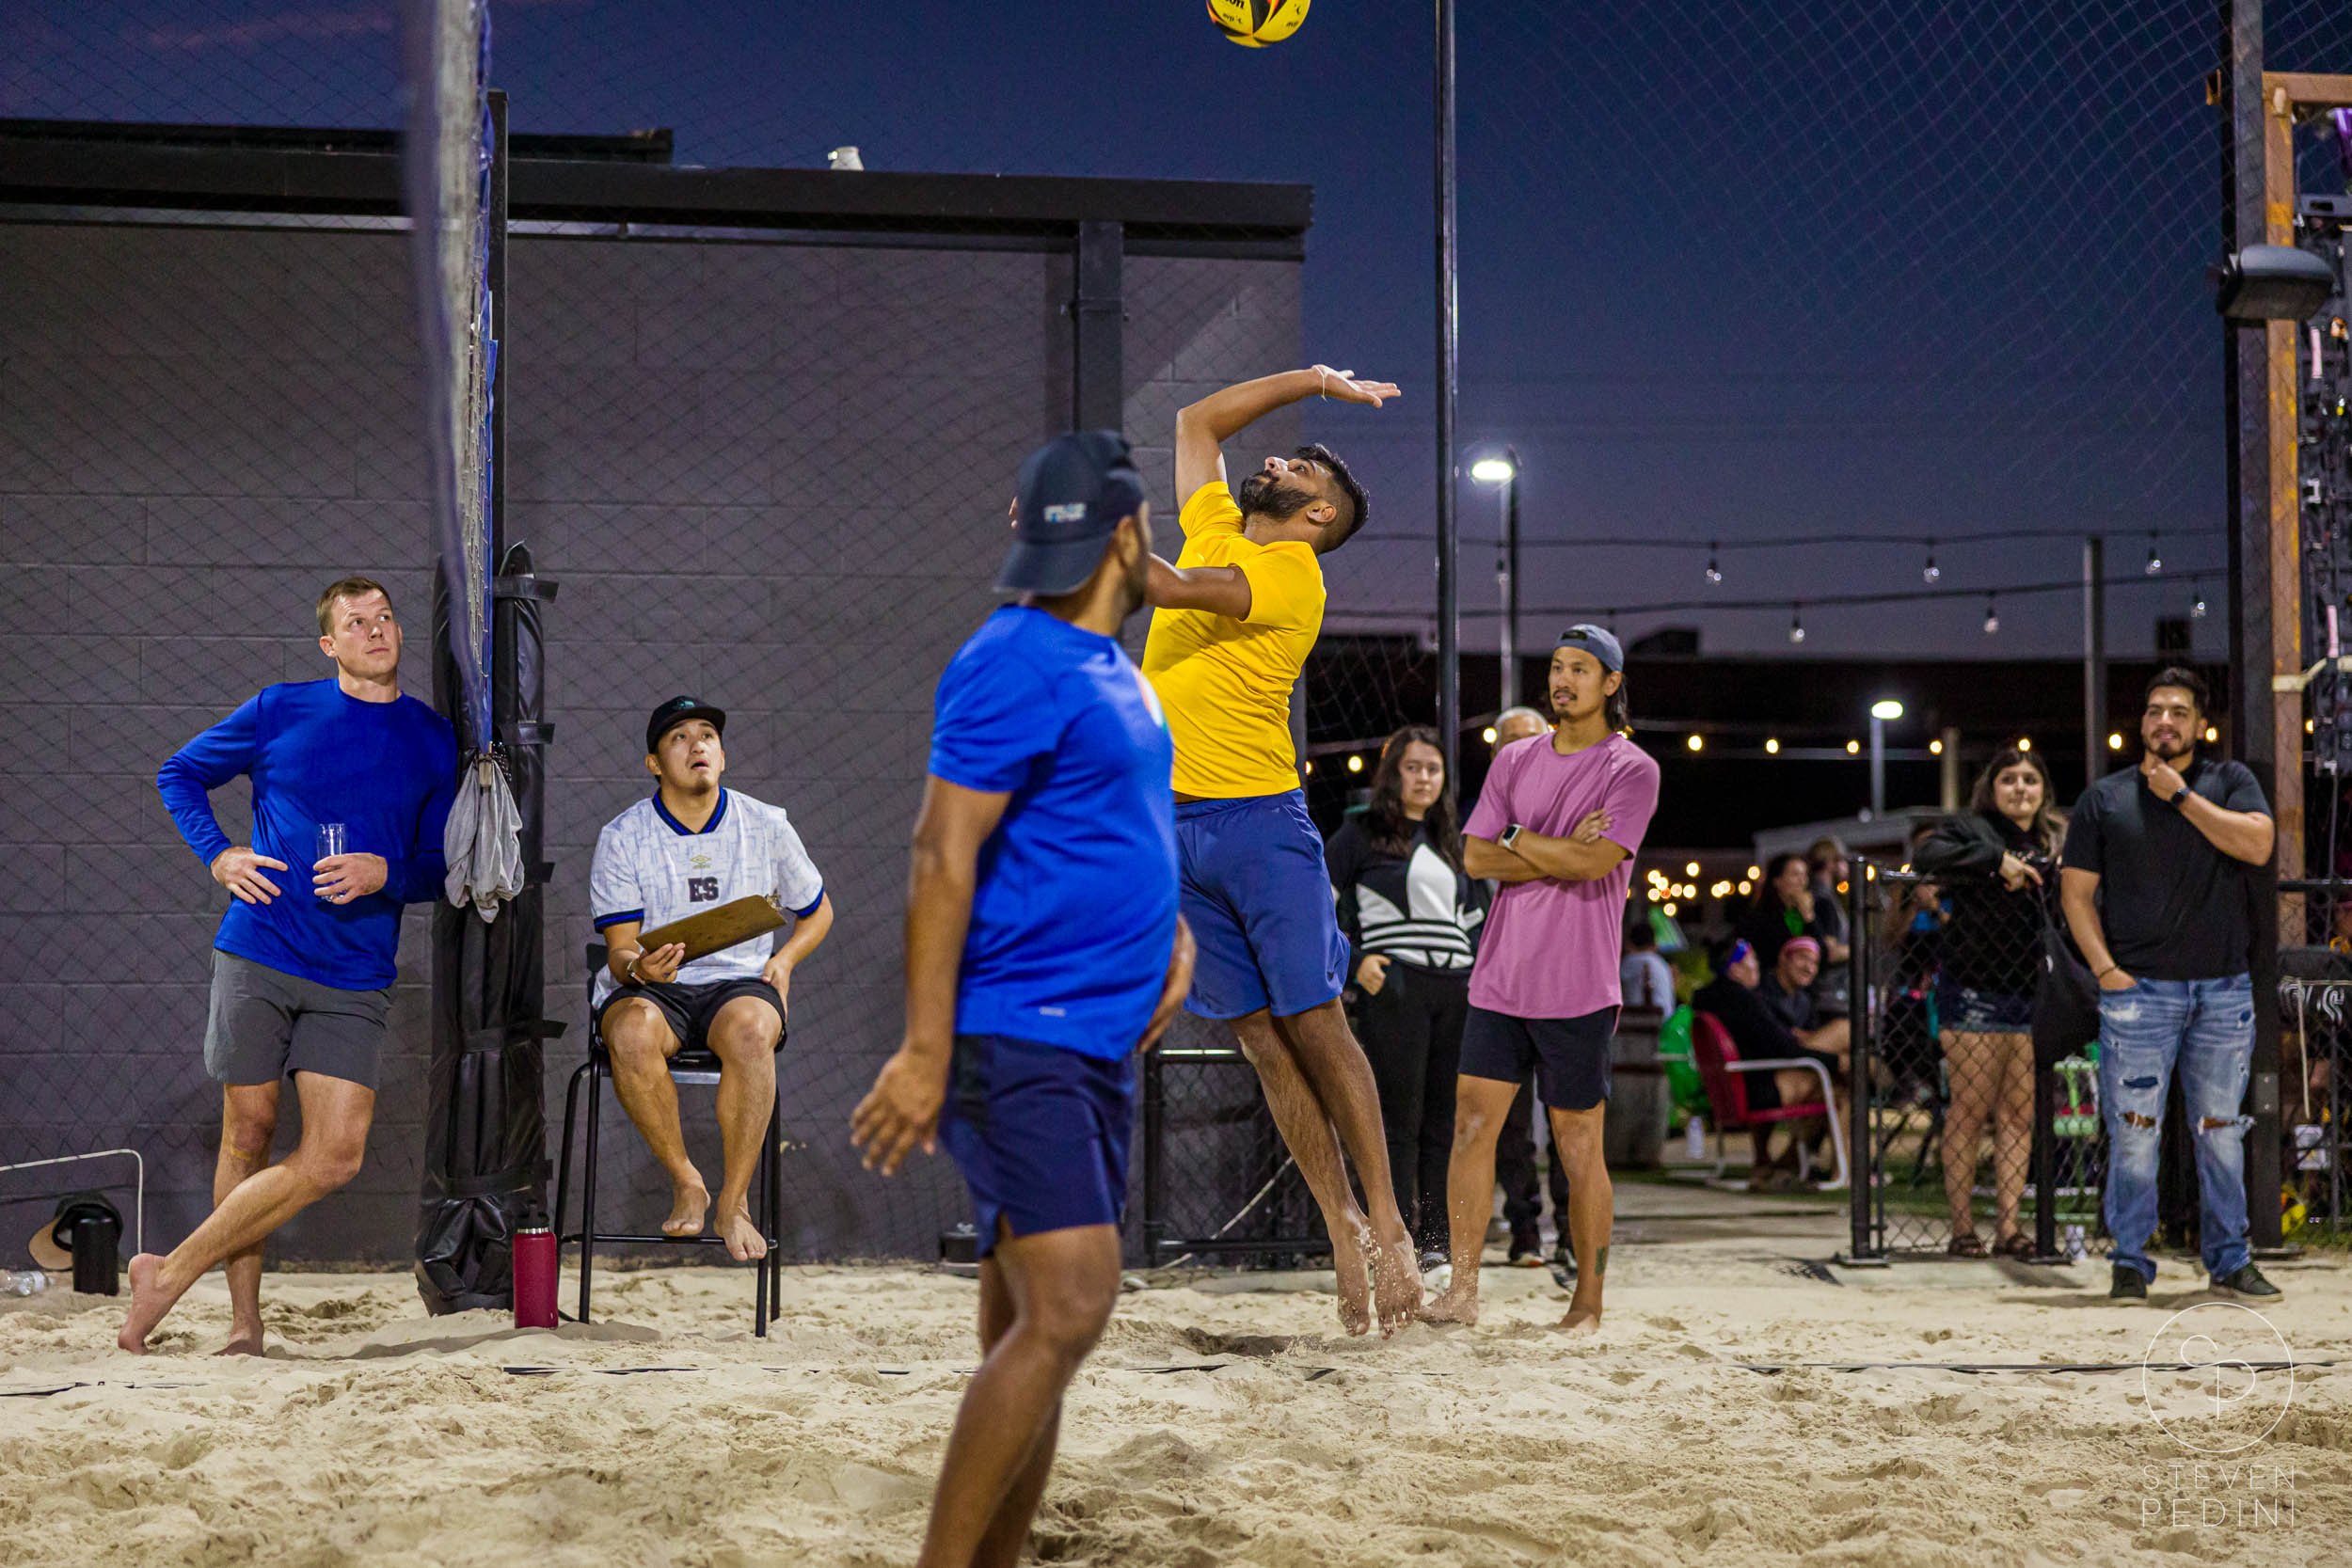 Steven Pedini Photography - Bumpy Pickle - Sand Volleyball - Houston TX - World Cup of Volleyball - 00350.jpg